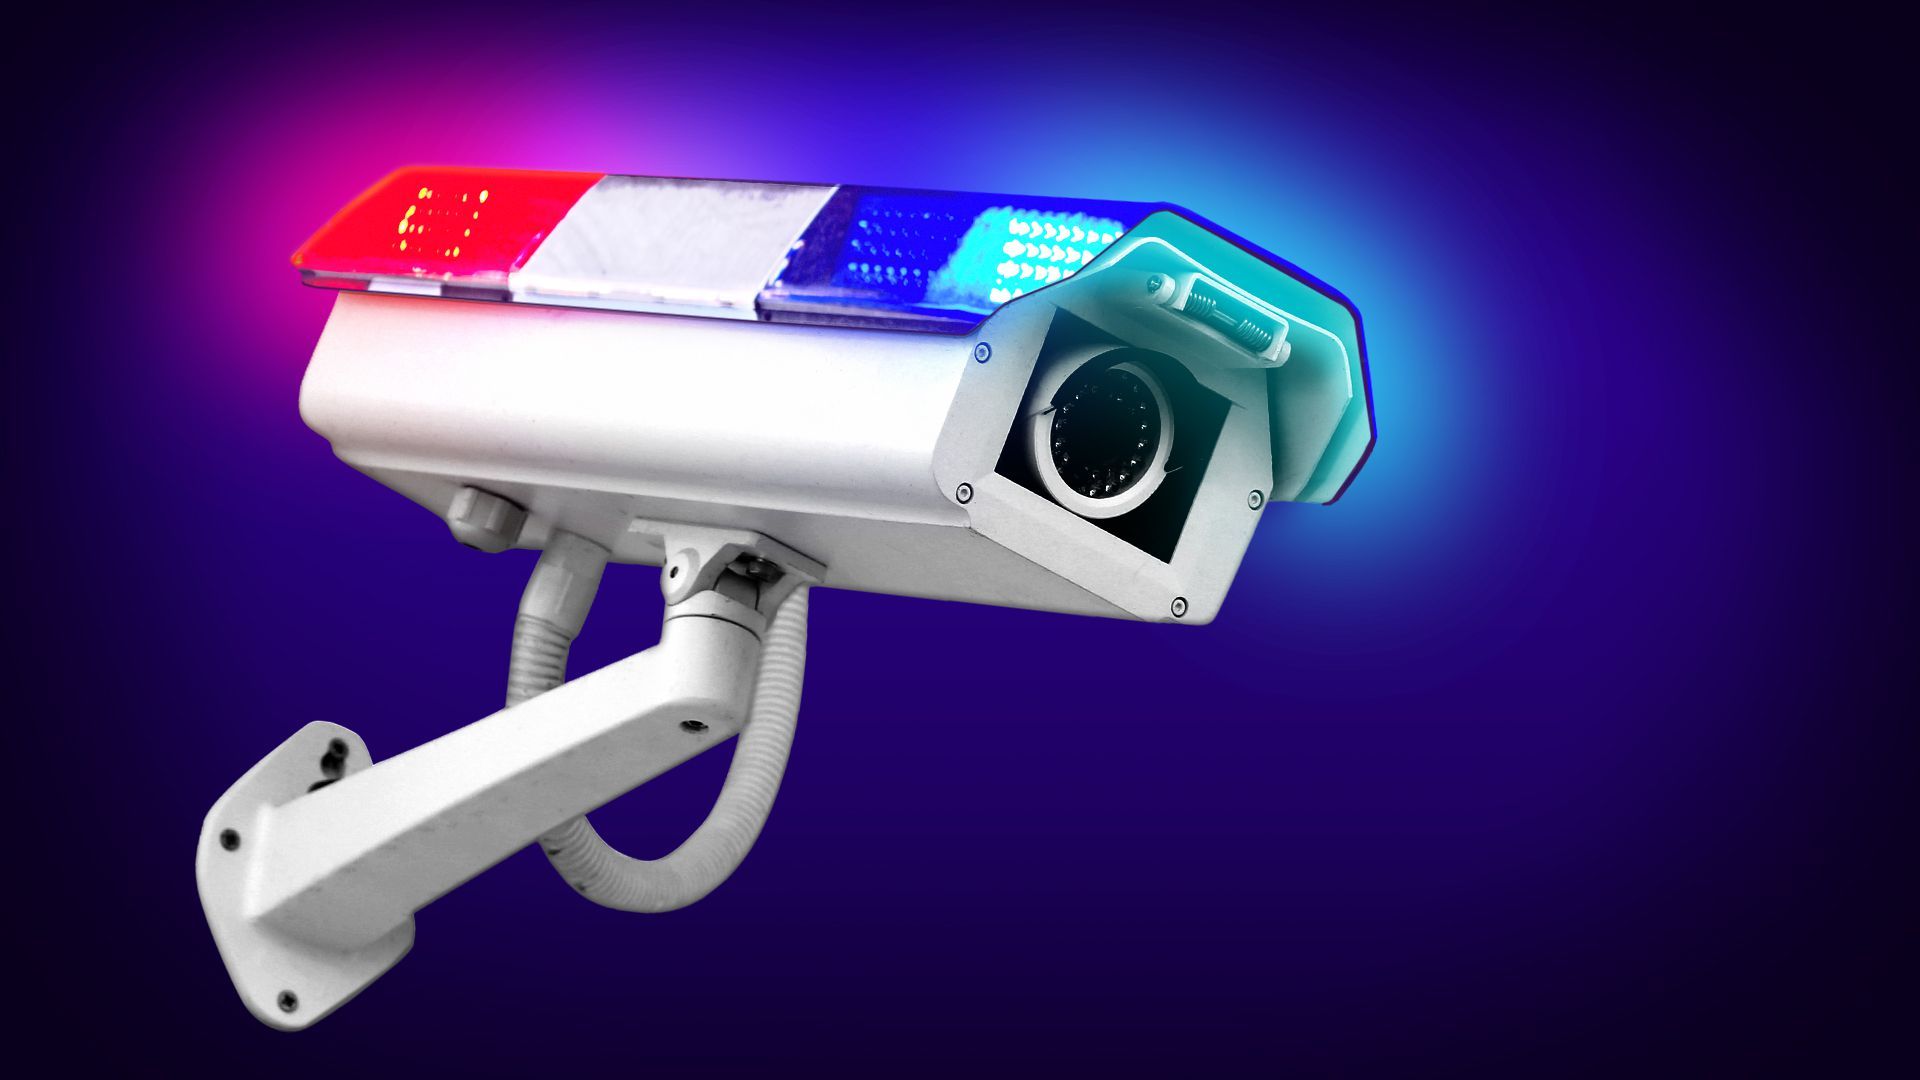 Illustration of a security camera topped with police car lights